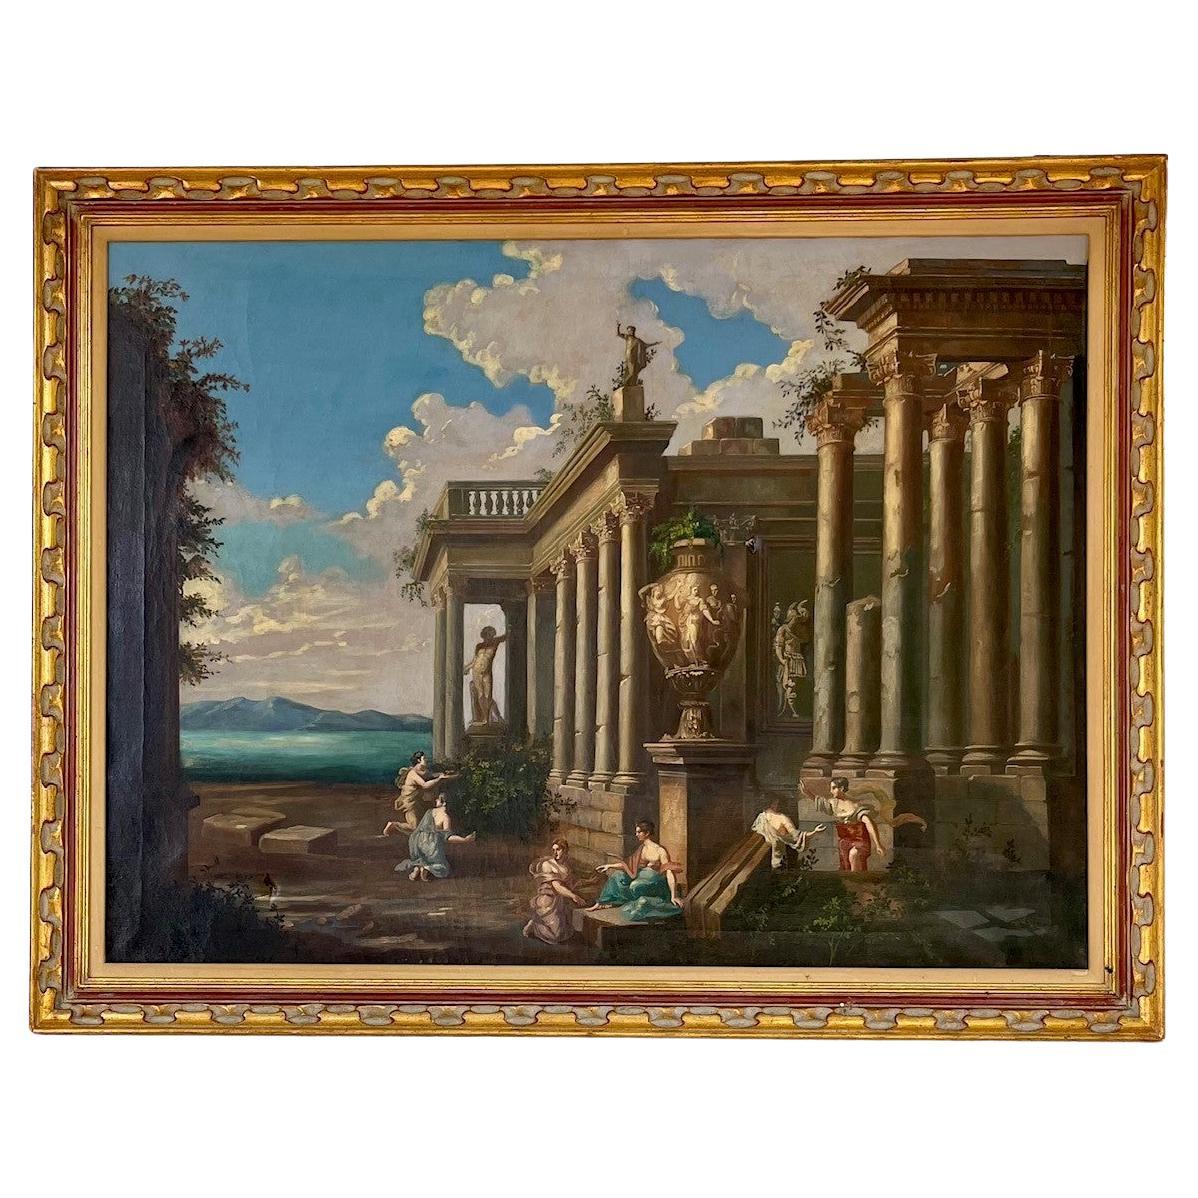 Architectural Capriccio of Roman Ancient Ruins with Figures